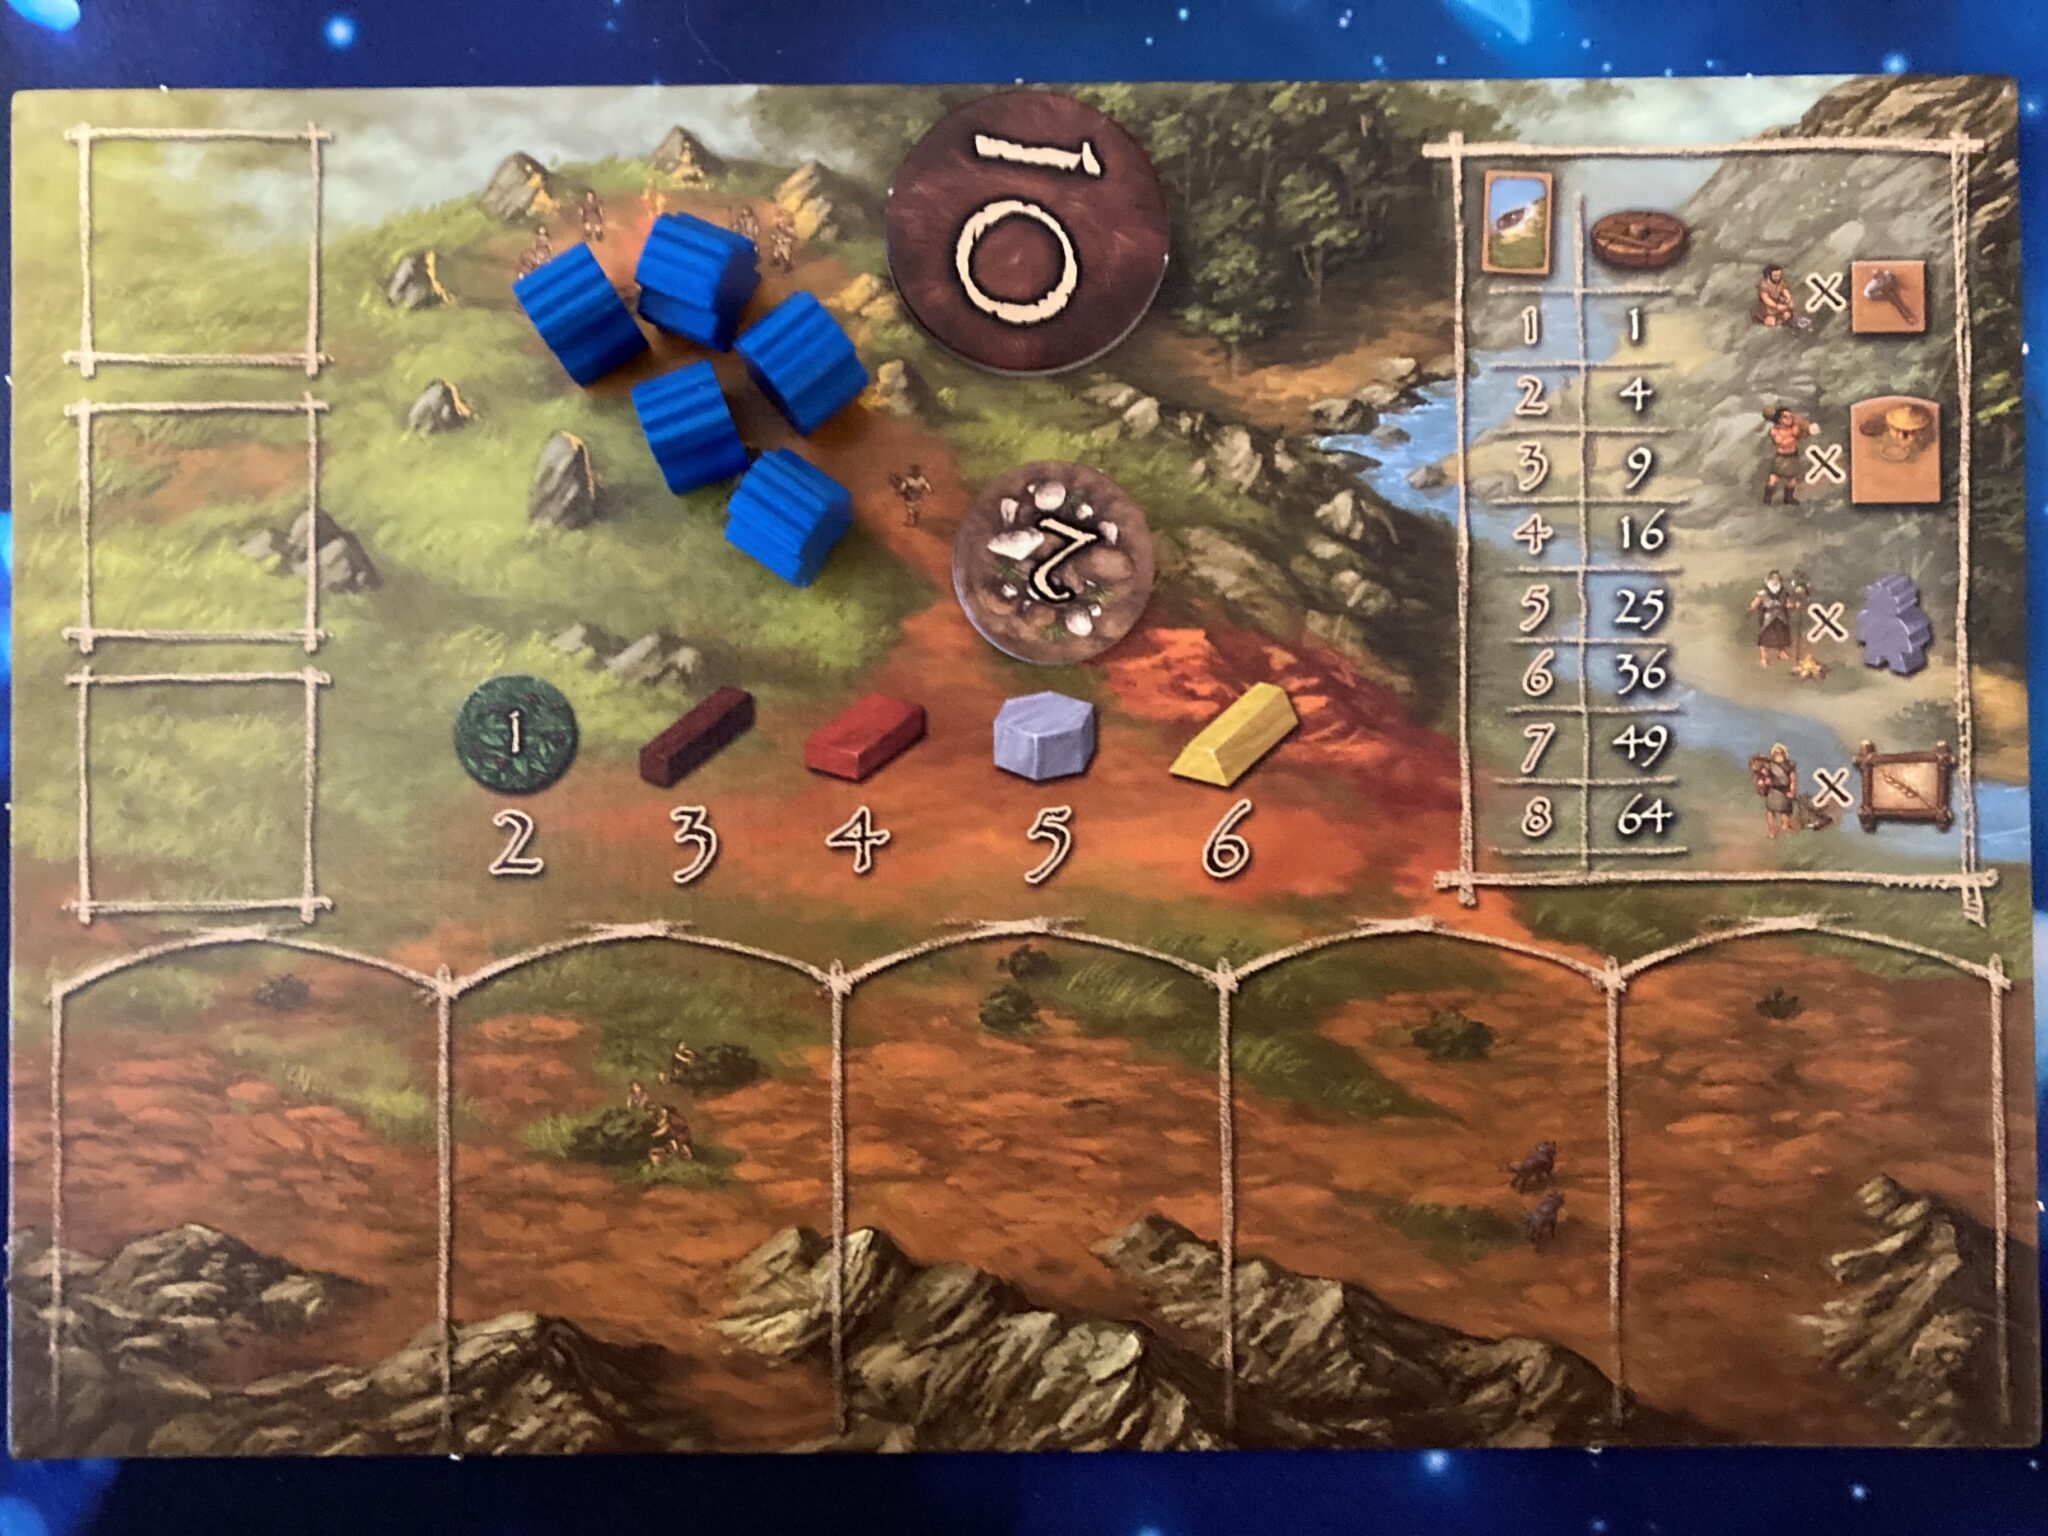 stone age board game blue player